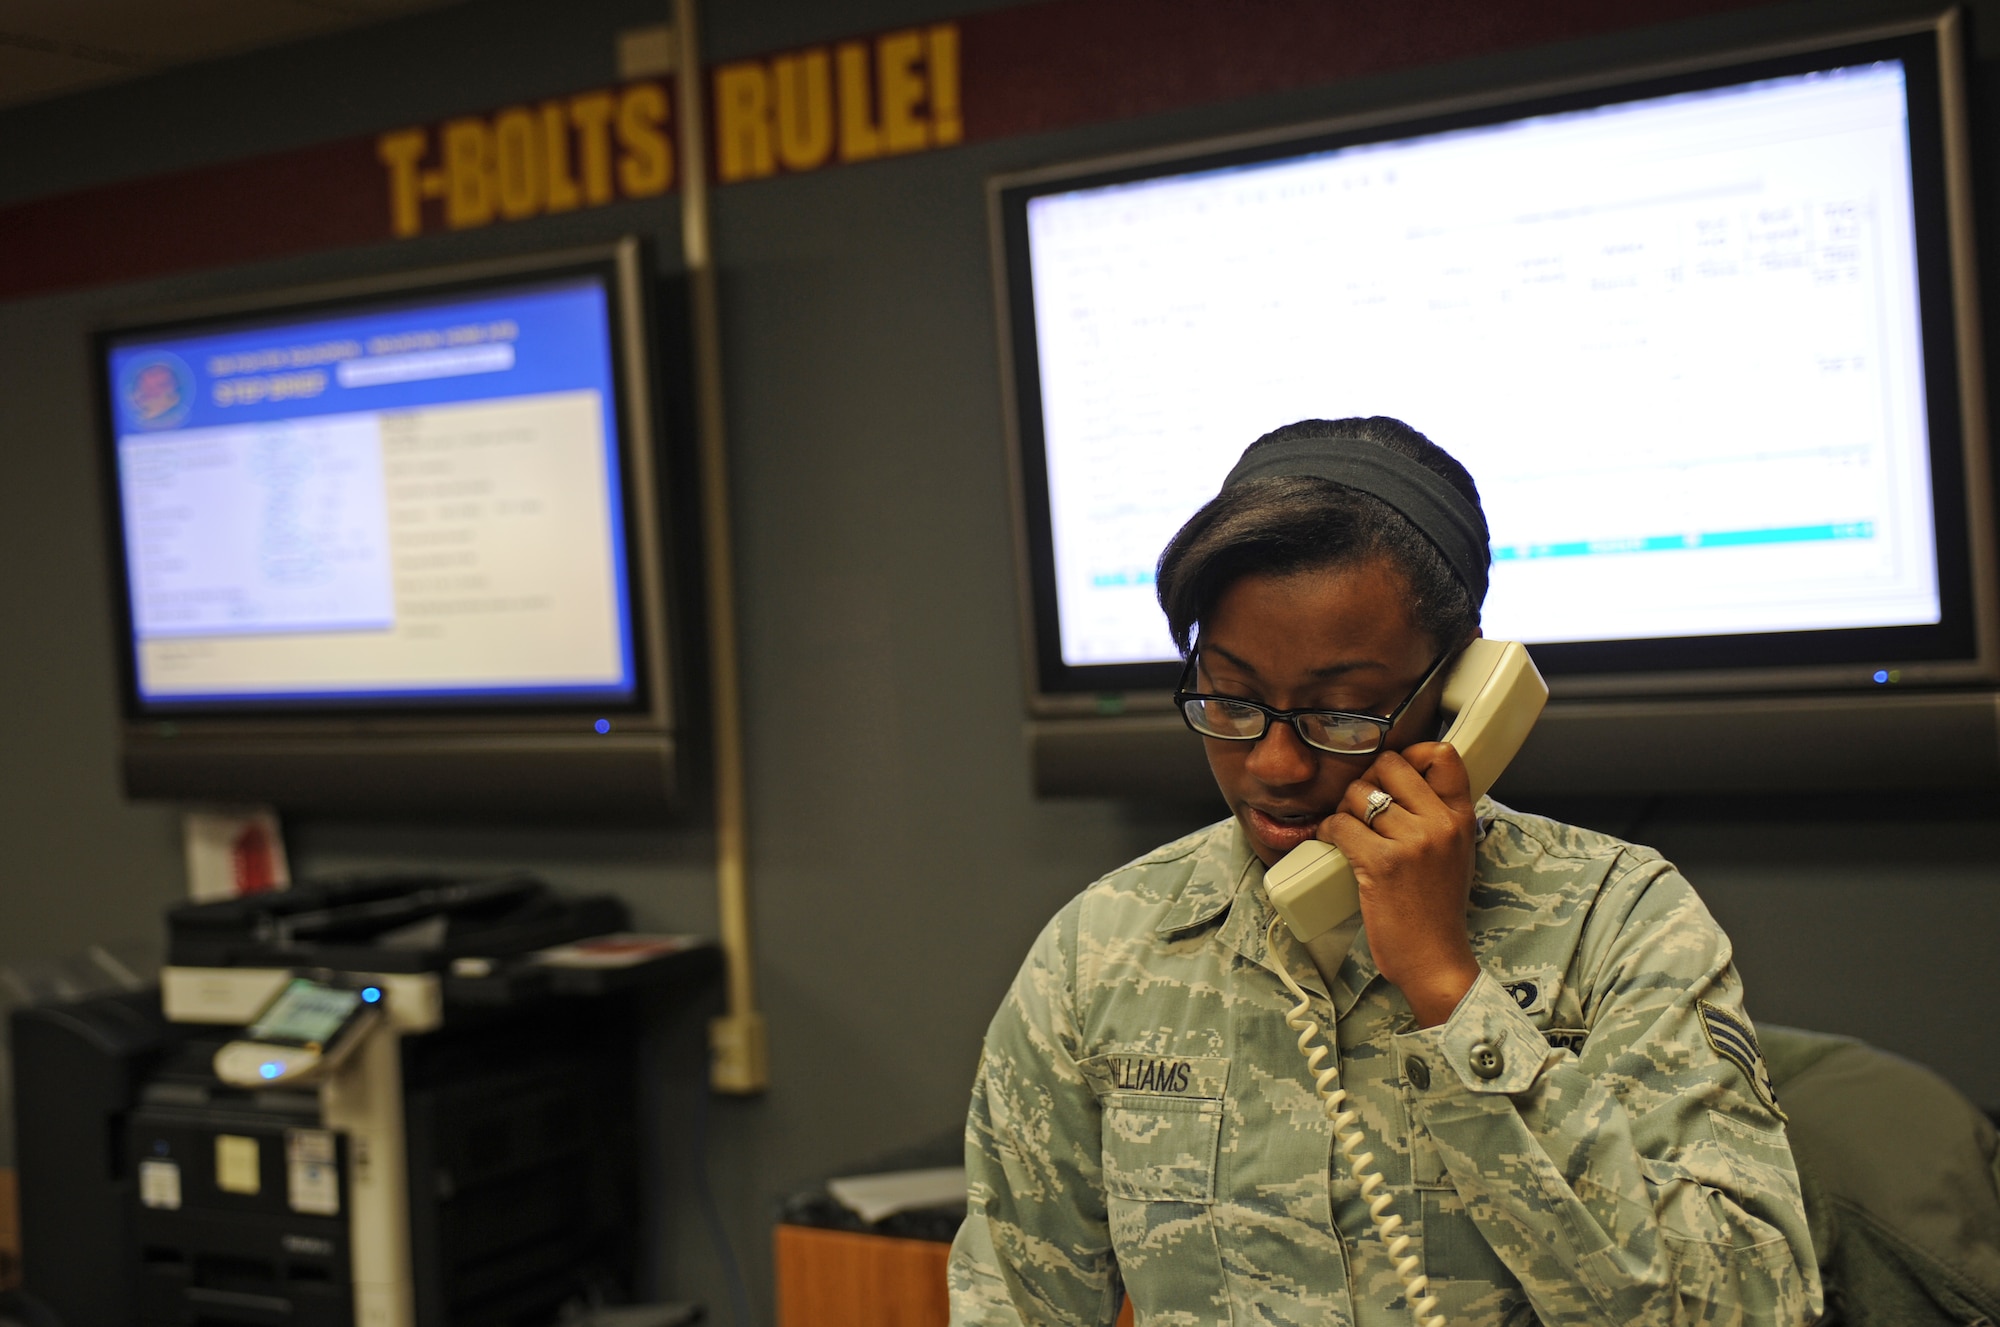 U.S. Air Force Senior Airman Casiana Curry-Williams, 389th Fighter Squadron aviation resource manager, mans the operations desk of the 389th FS March 18, 2013, at Mountain Home Air Force Base, Idaho. Squadron aviation resource managers are responsible for ensuring everything and everyone is ready for the daily flying missions. (U.S. Air Force photo/Senior Airman Benjamin Sutton)